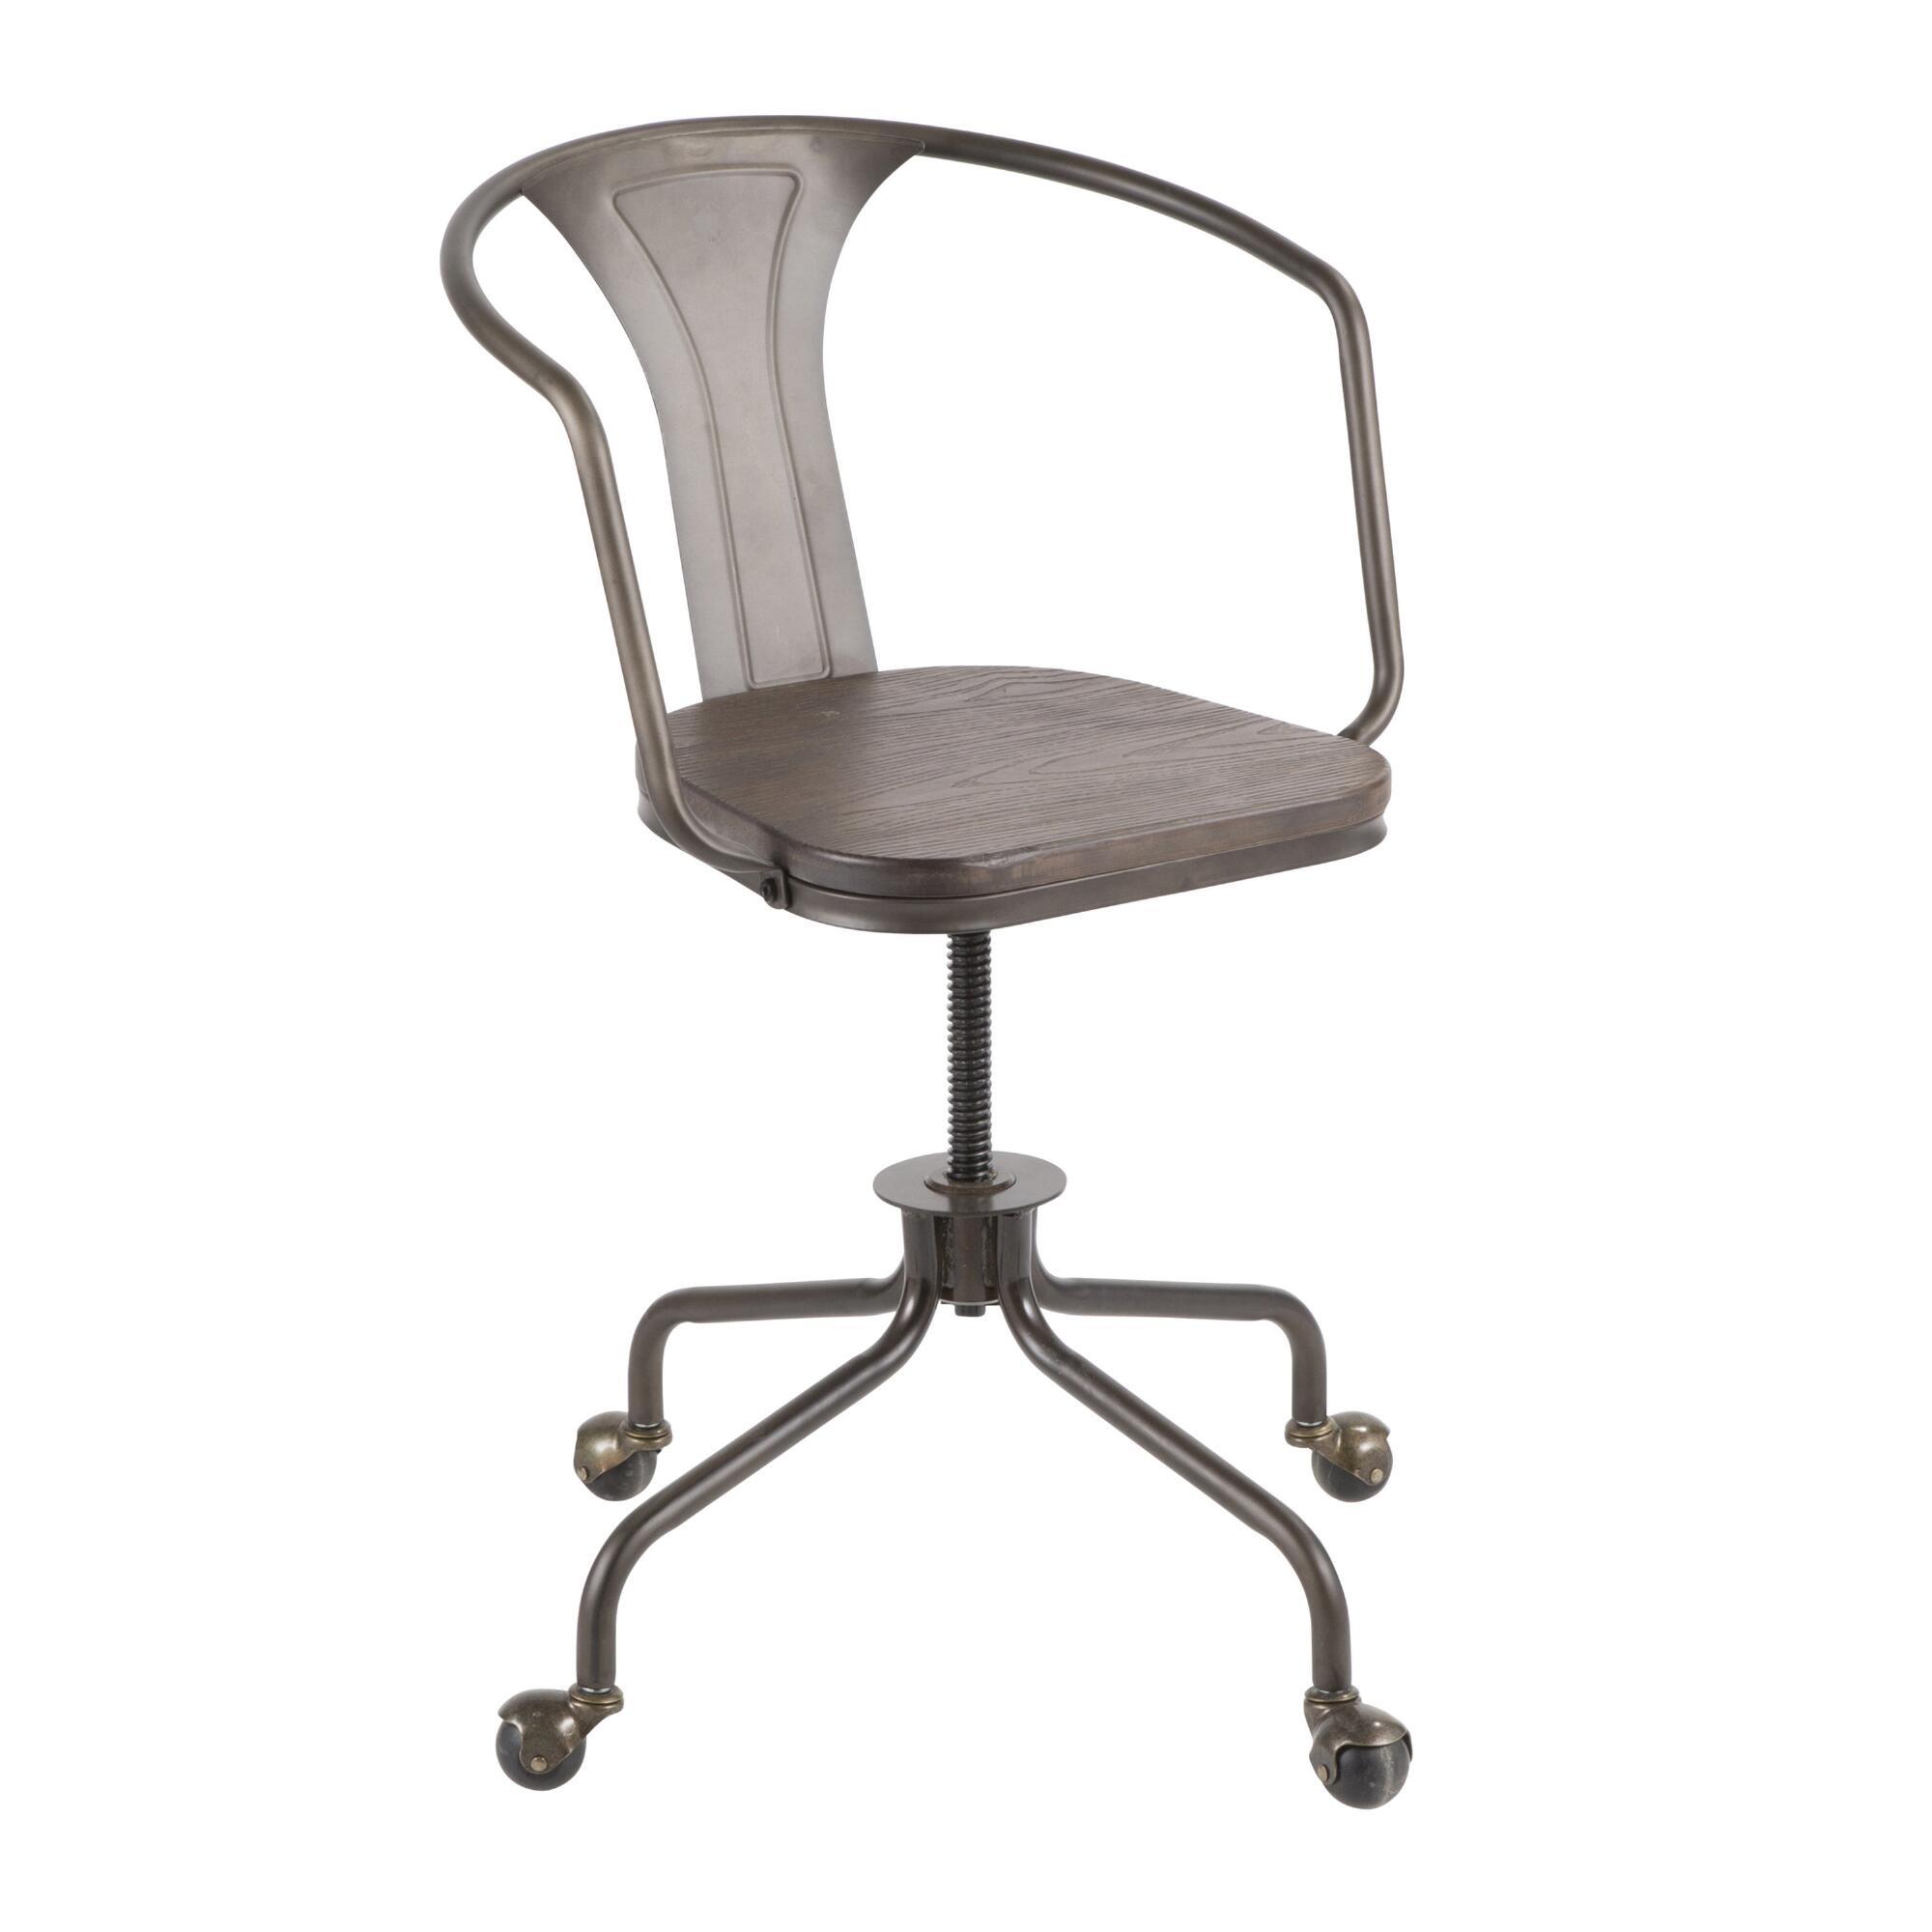 Metal and Espresso Wood Arwen Home Office Chair: White by World Market